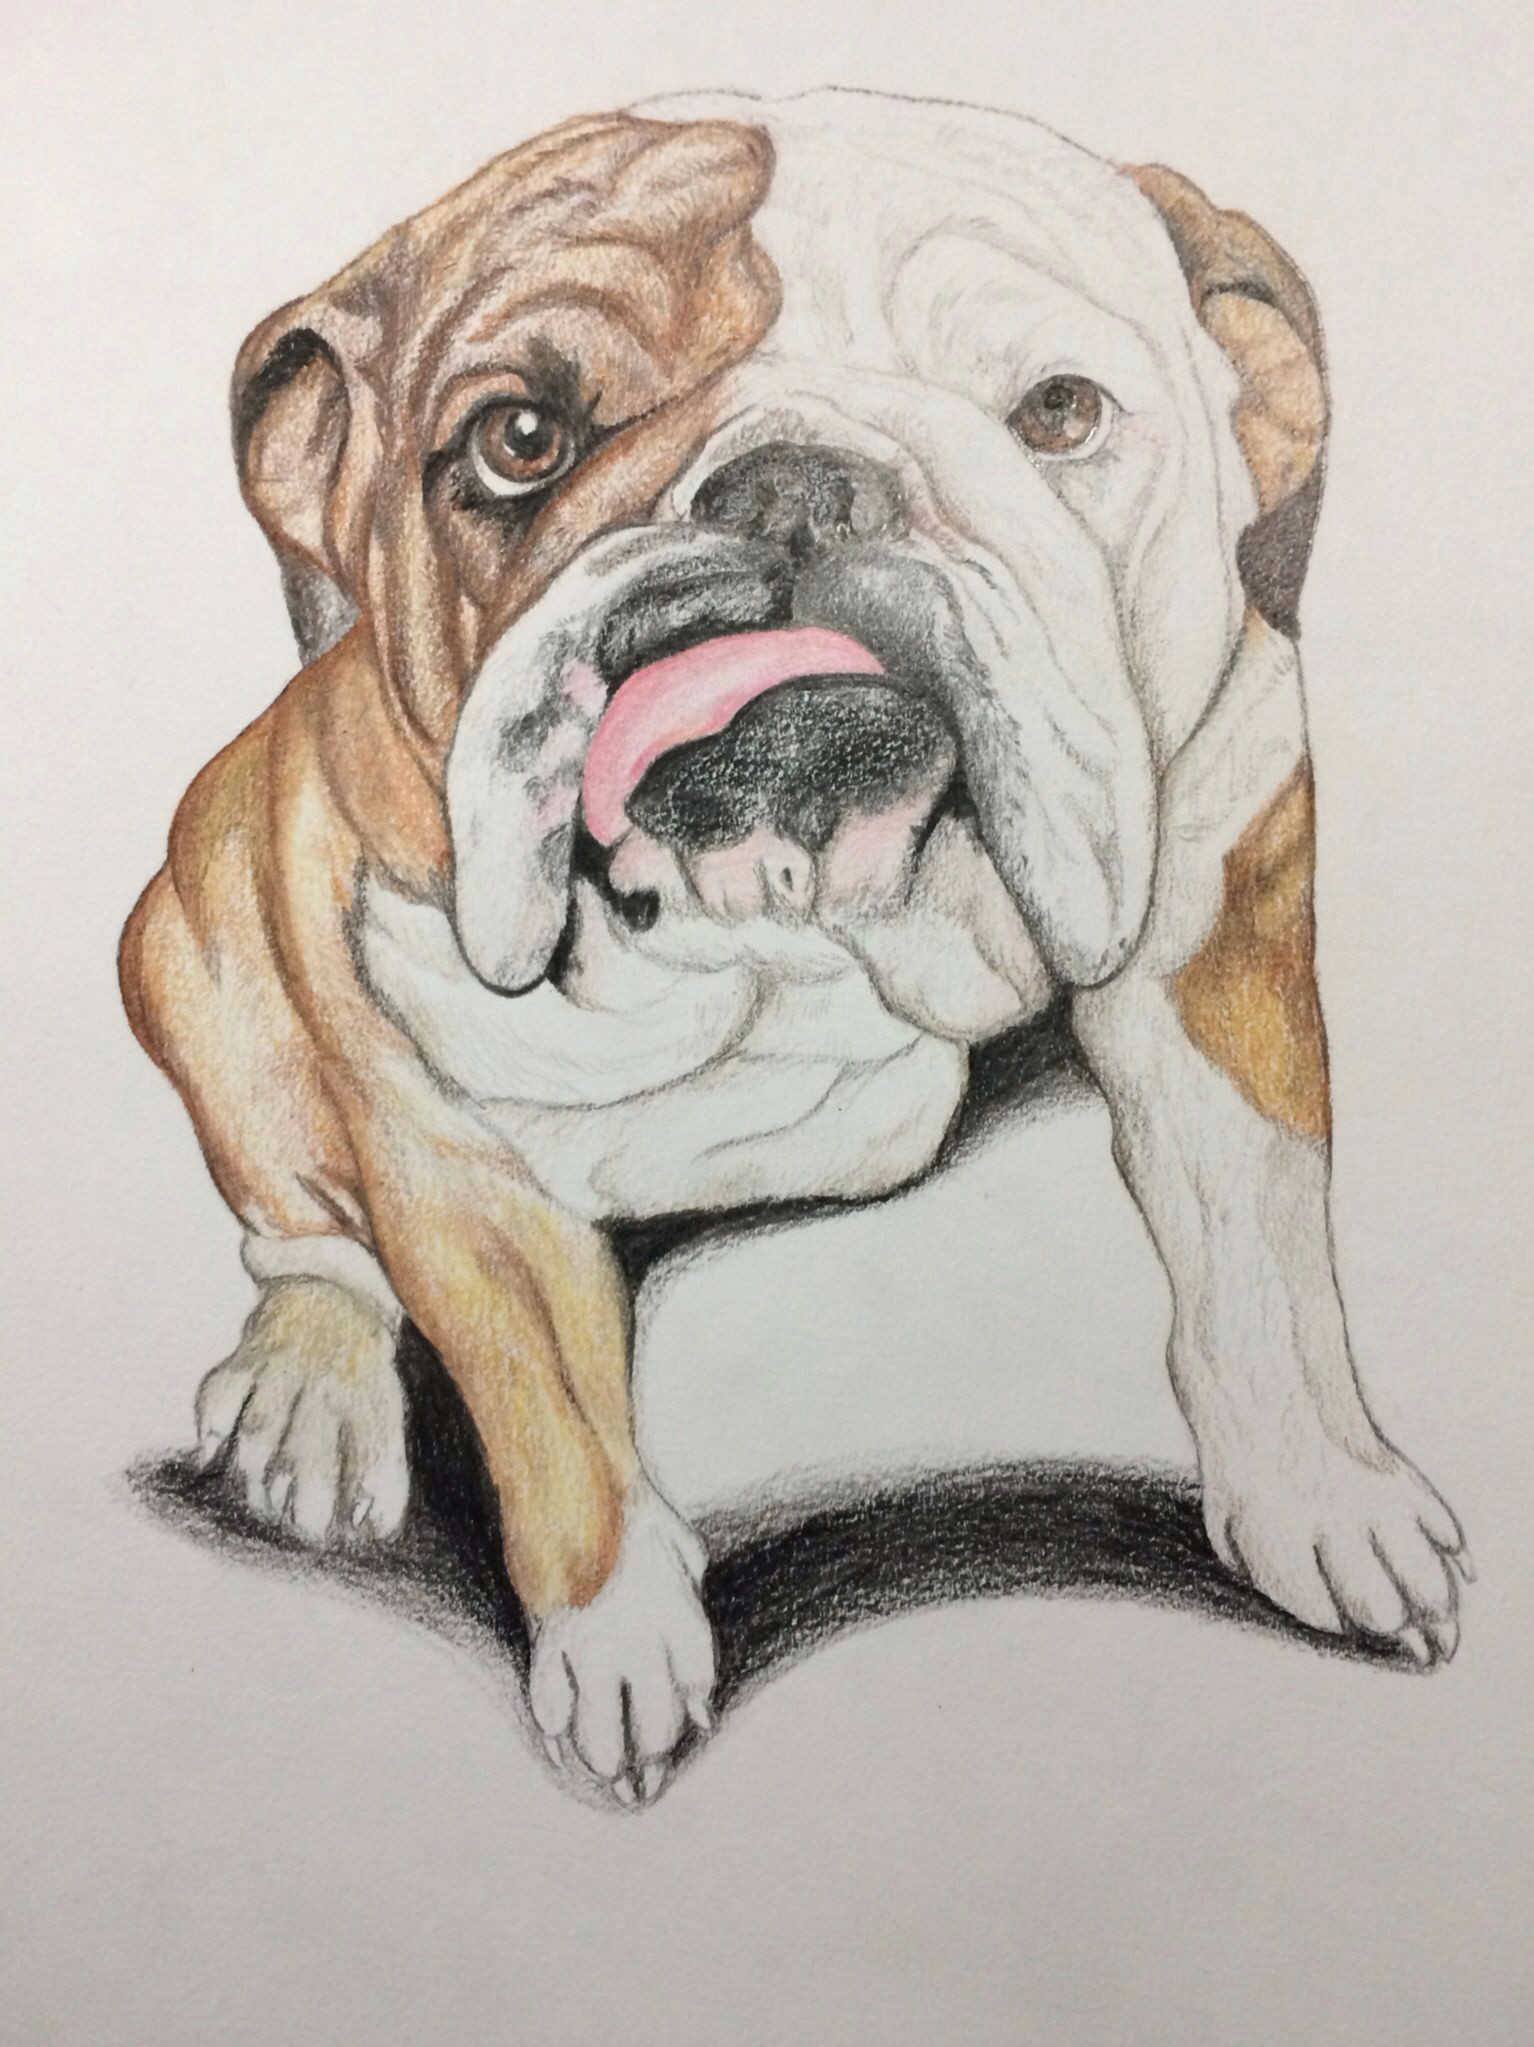 Bulldogs Drawing This is A Bulldog Portrait I Drew I Love Drawing and Bulldogs are